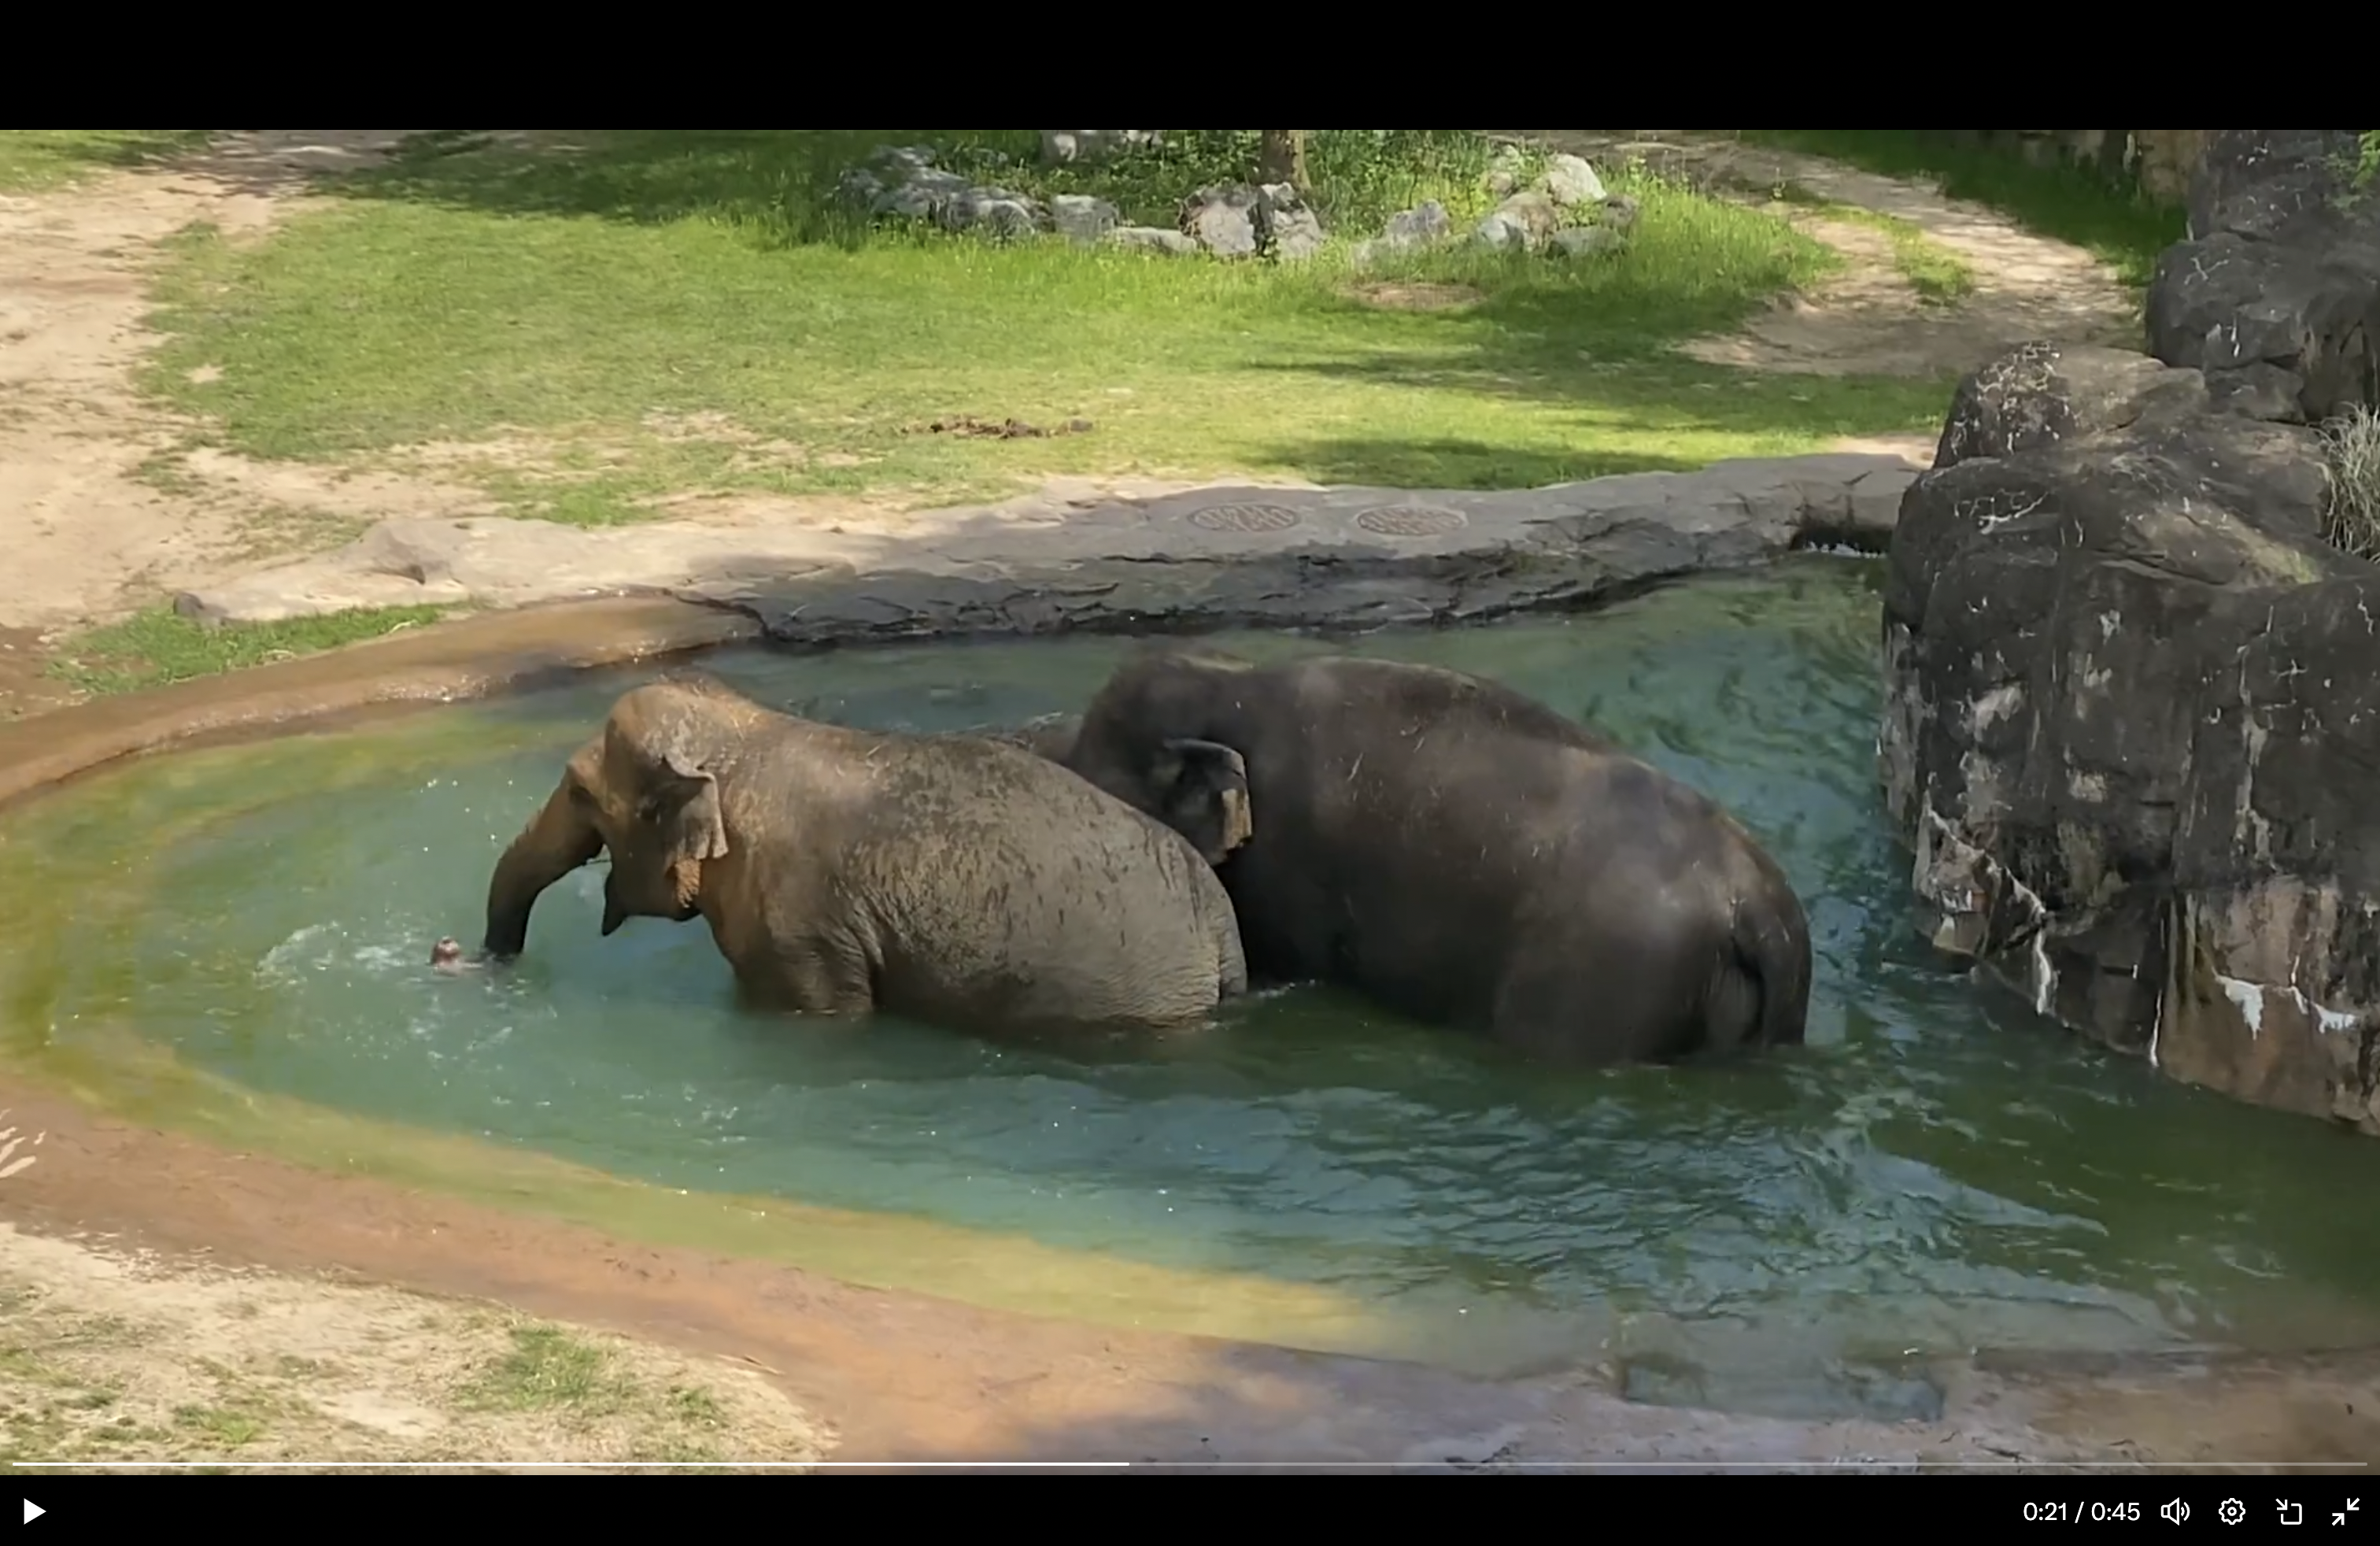 Elephants play in the water